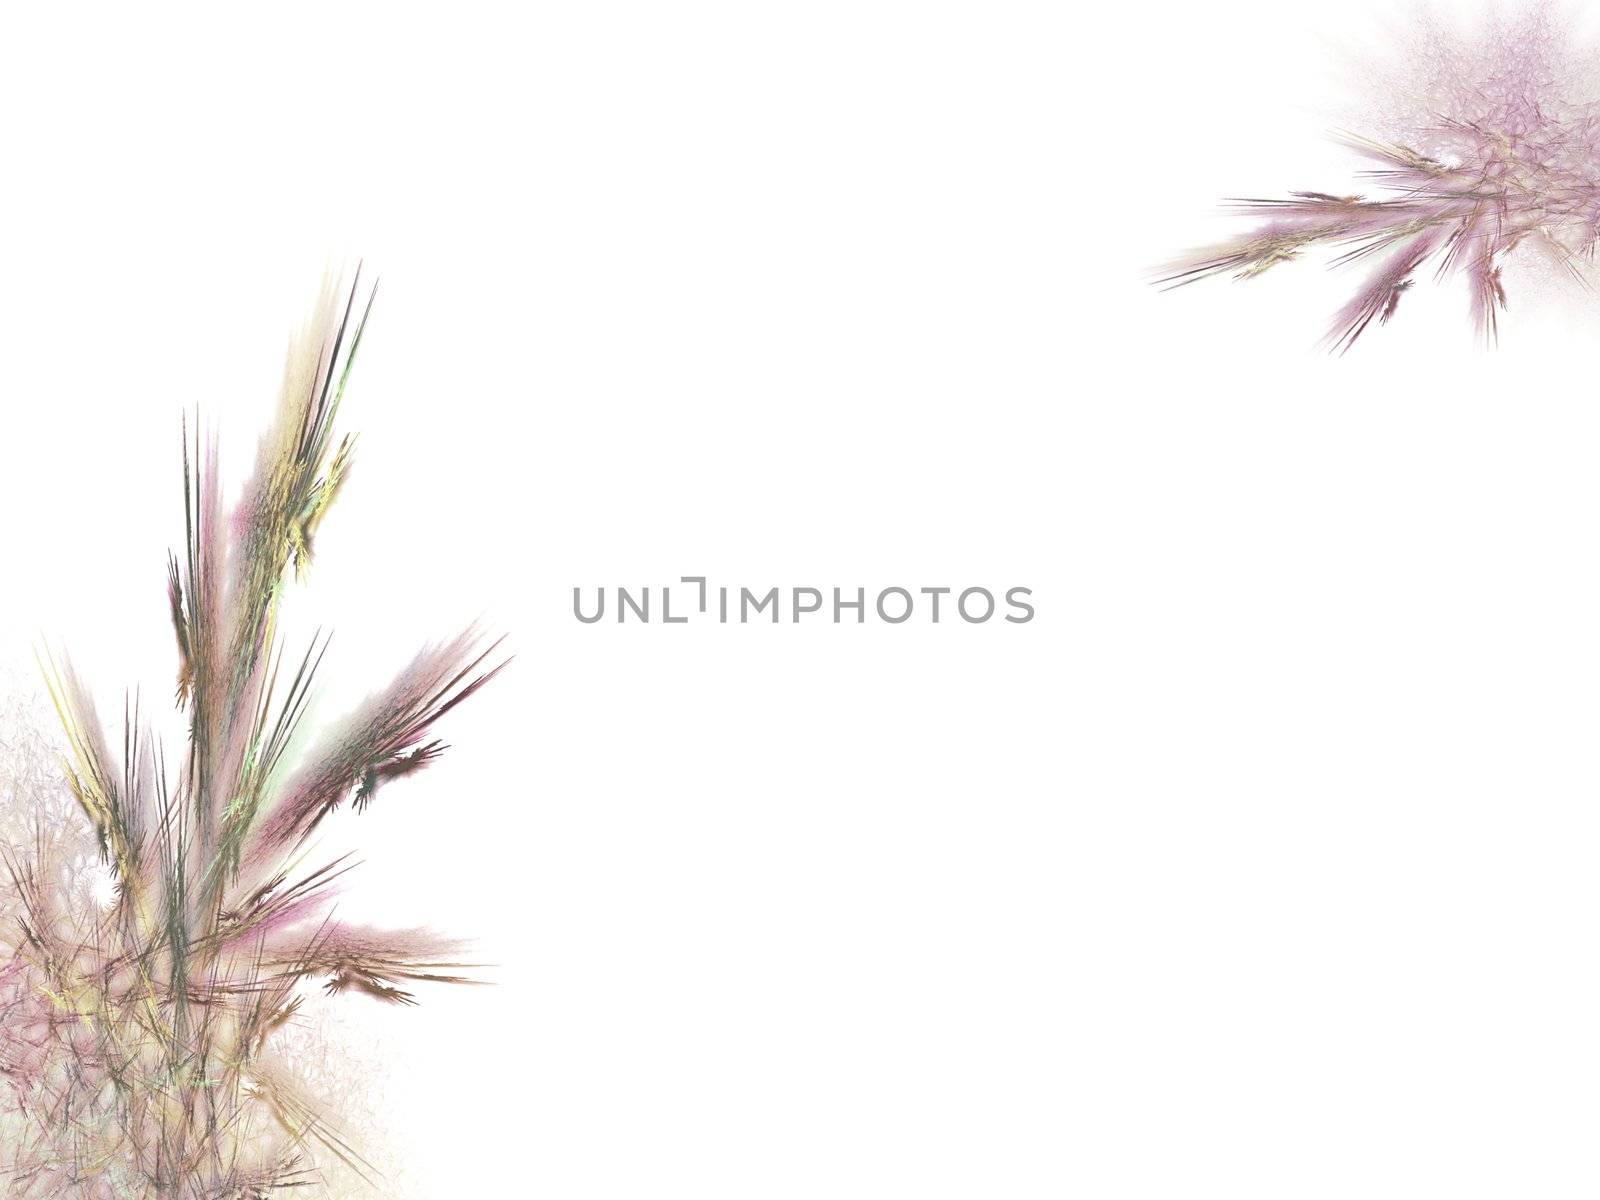 Fractal illustration: A bunch of rush and grass as decoration on a pure white background.